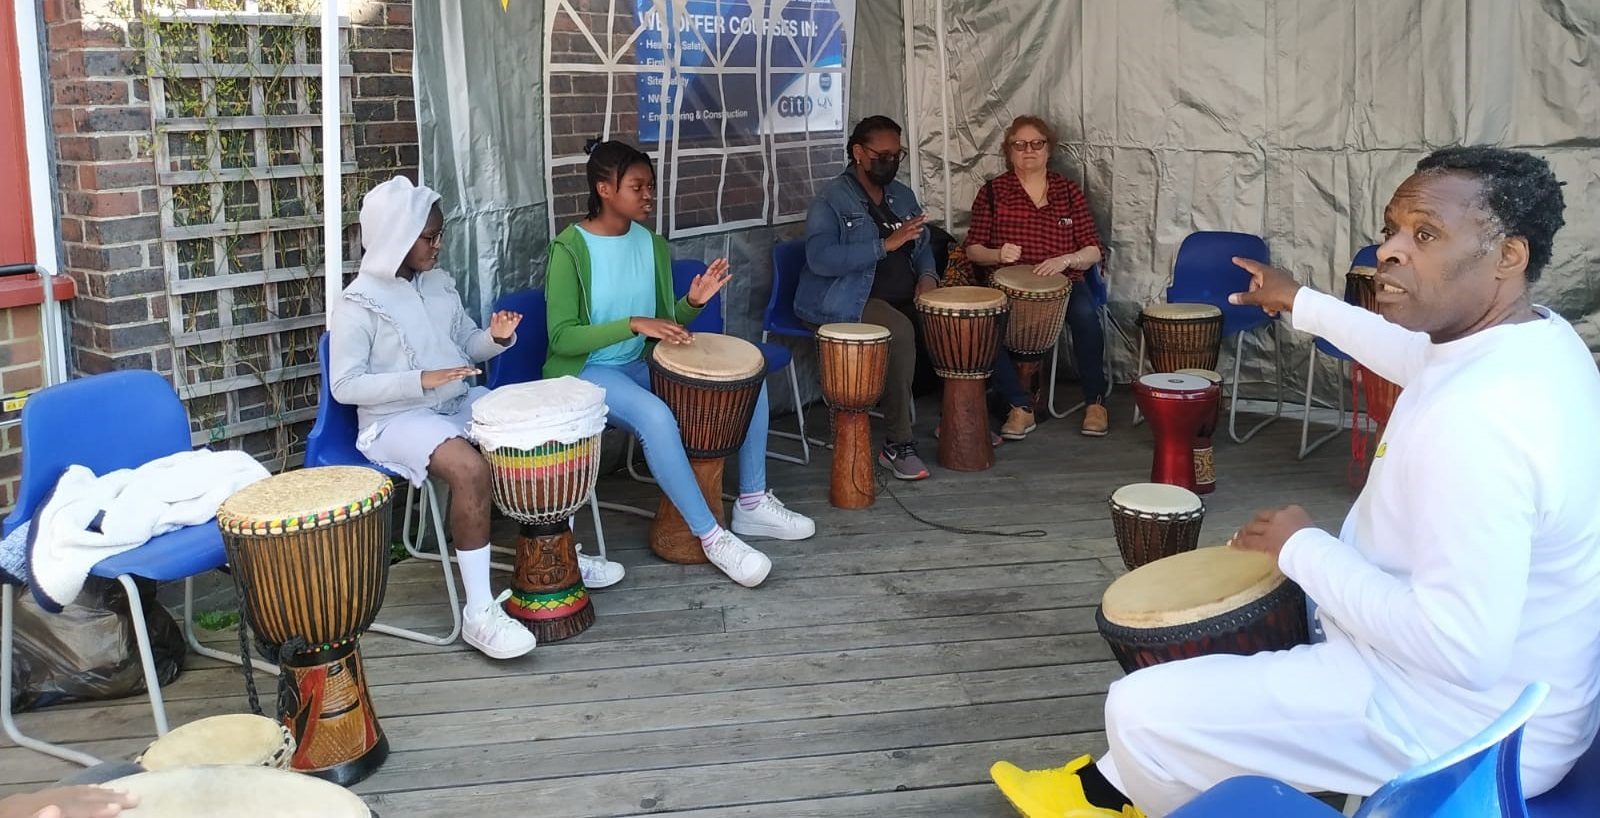 Happy Drums intergenerational music project for wellbeing